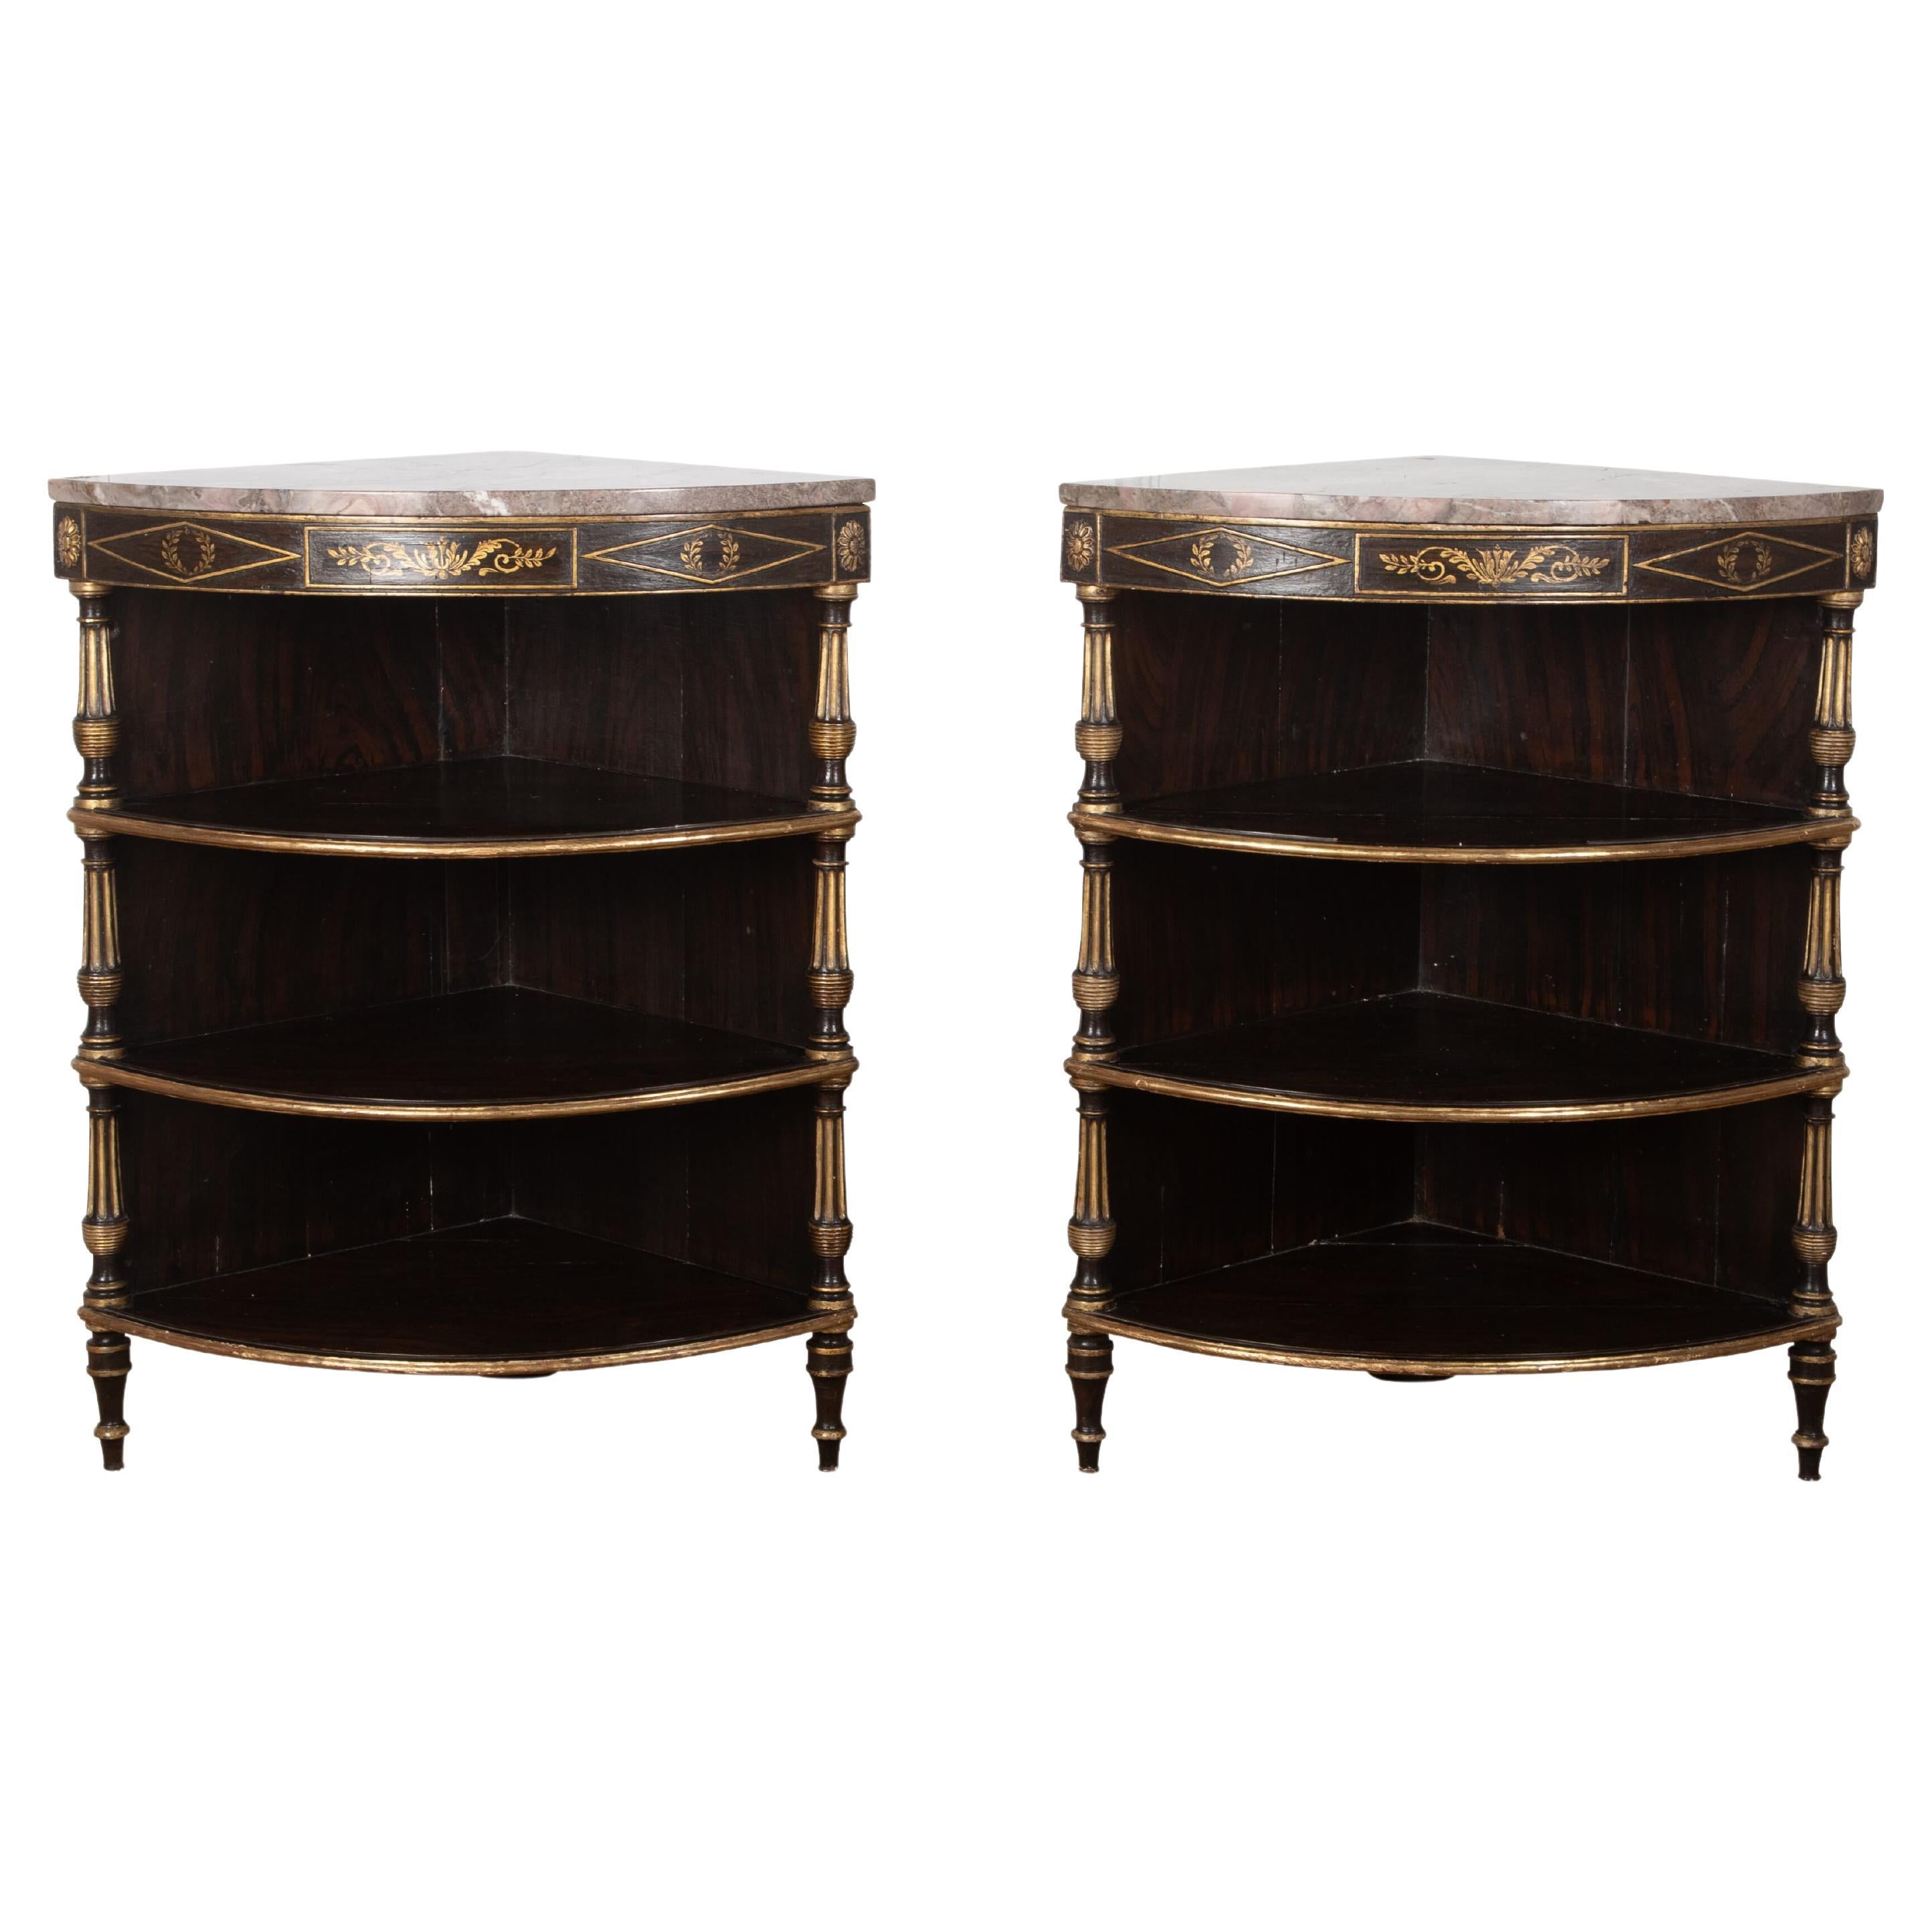 Regency Pair of Decorated & Marble Top Corner Cabinets For Sale